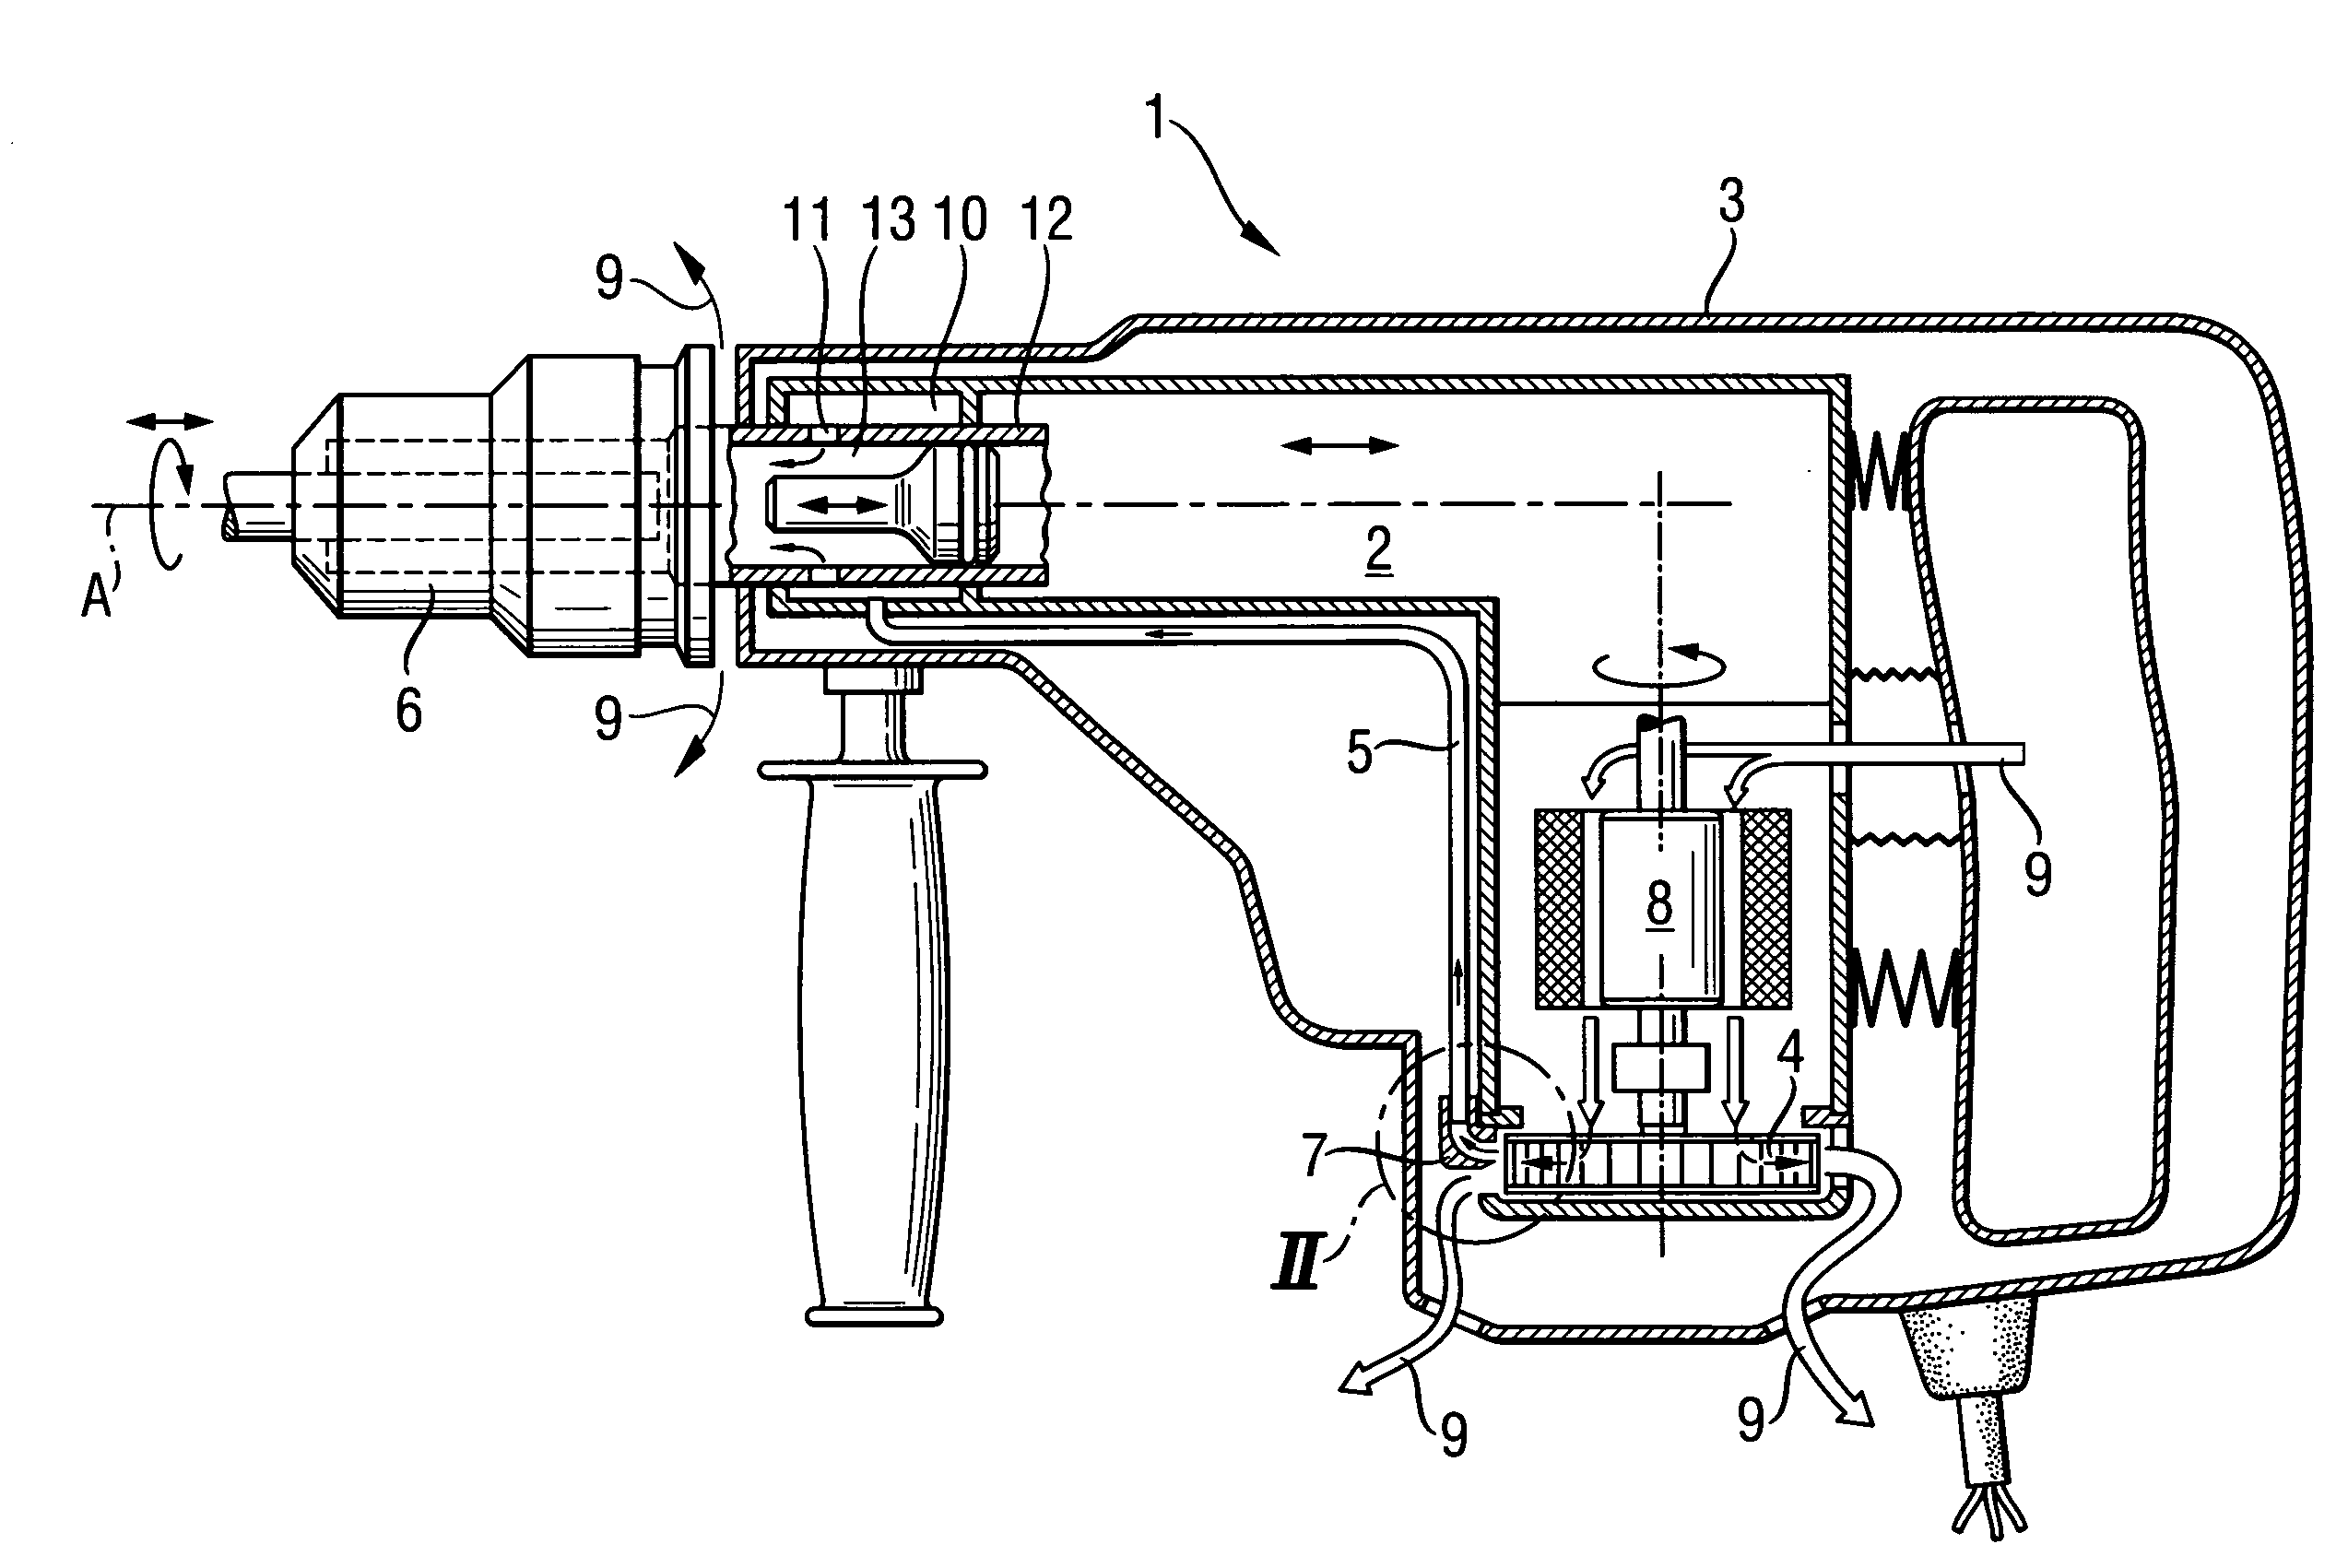 Electrical hand-held tool with a cooling fan